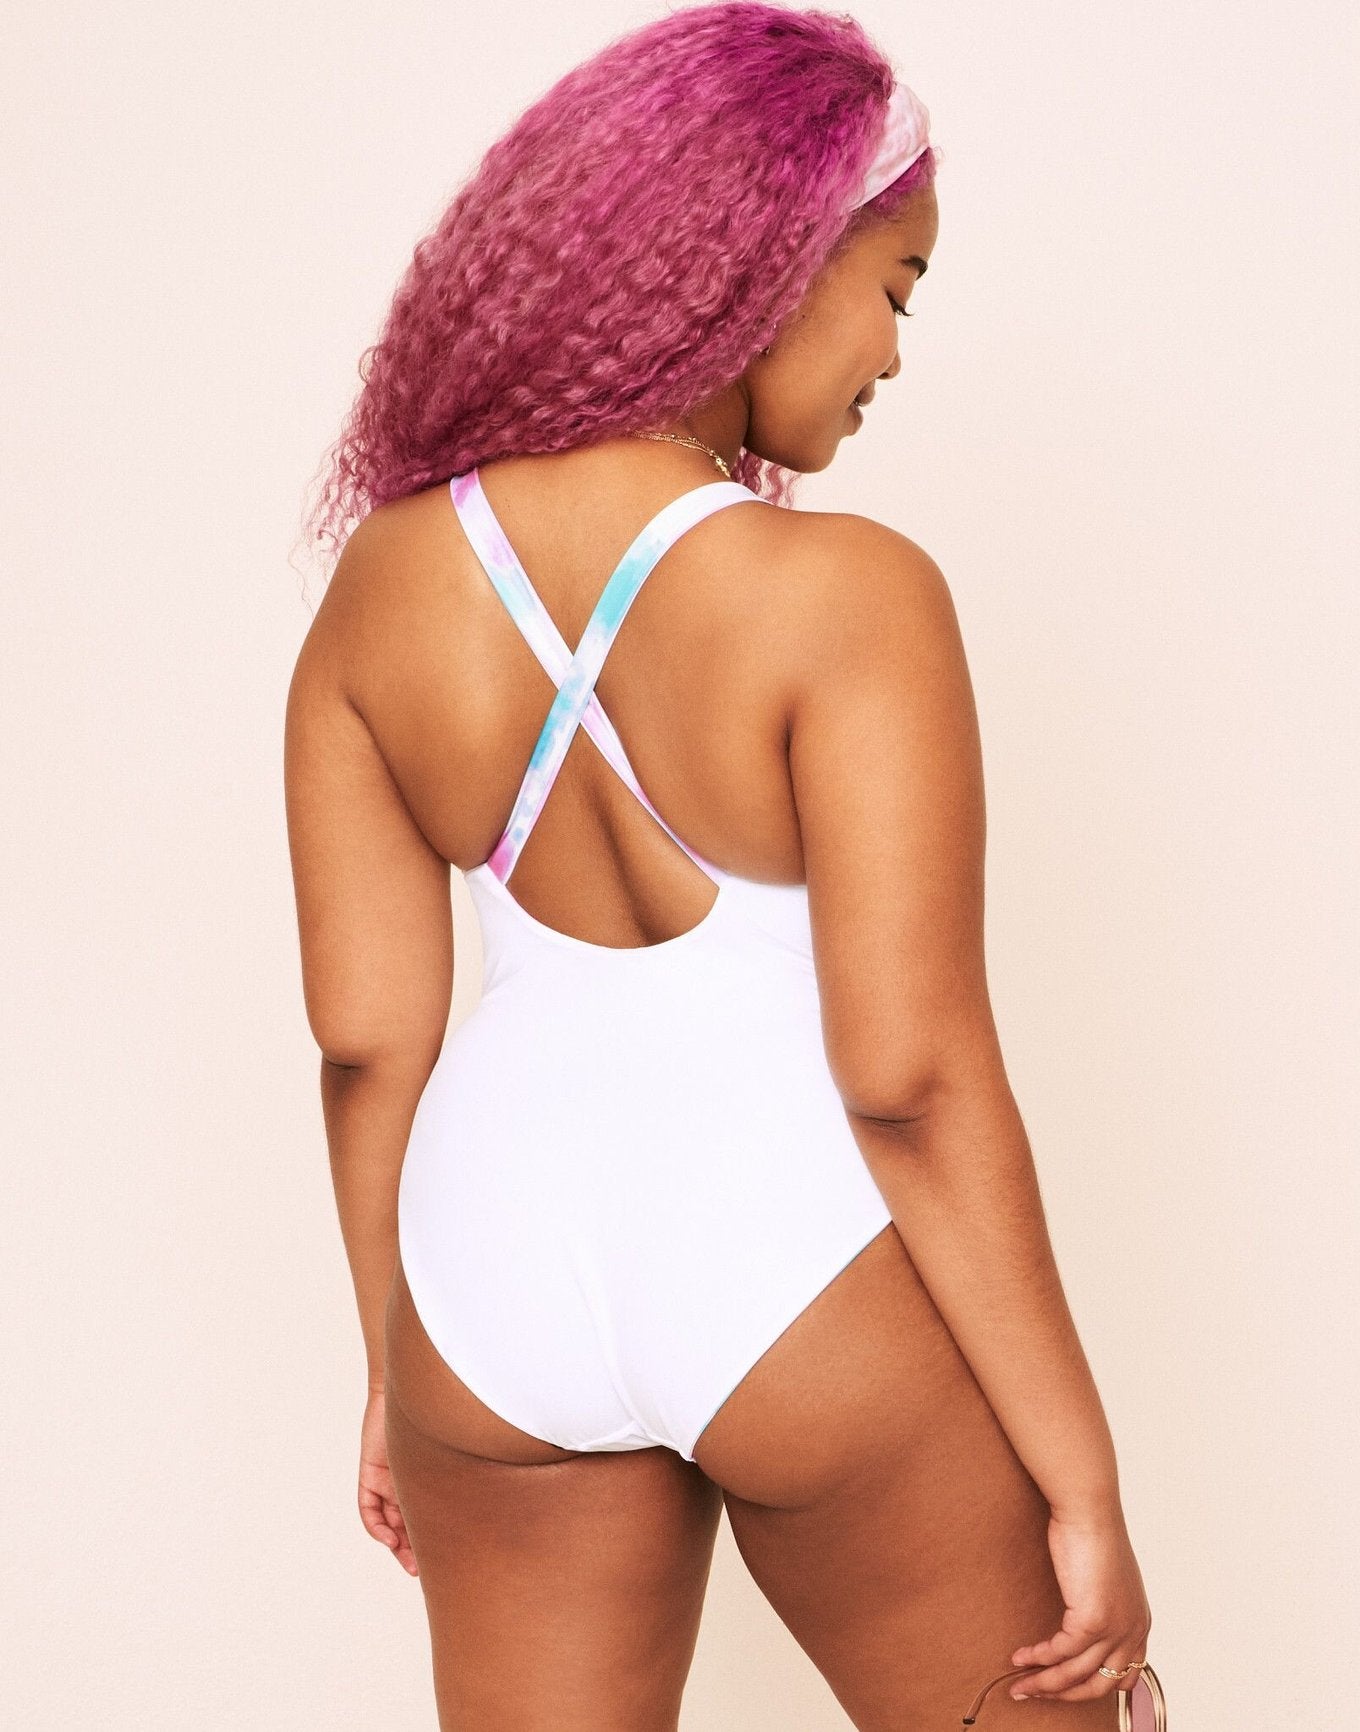 Earth Republic Serenity Reversible One Piece Reversible One-Piece in color PR171261 and shape one piece